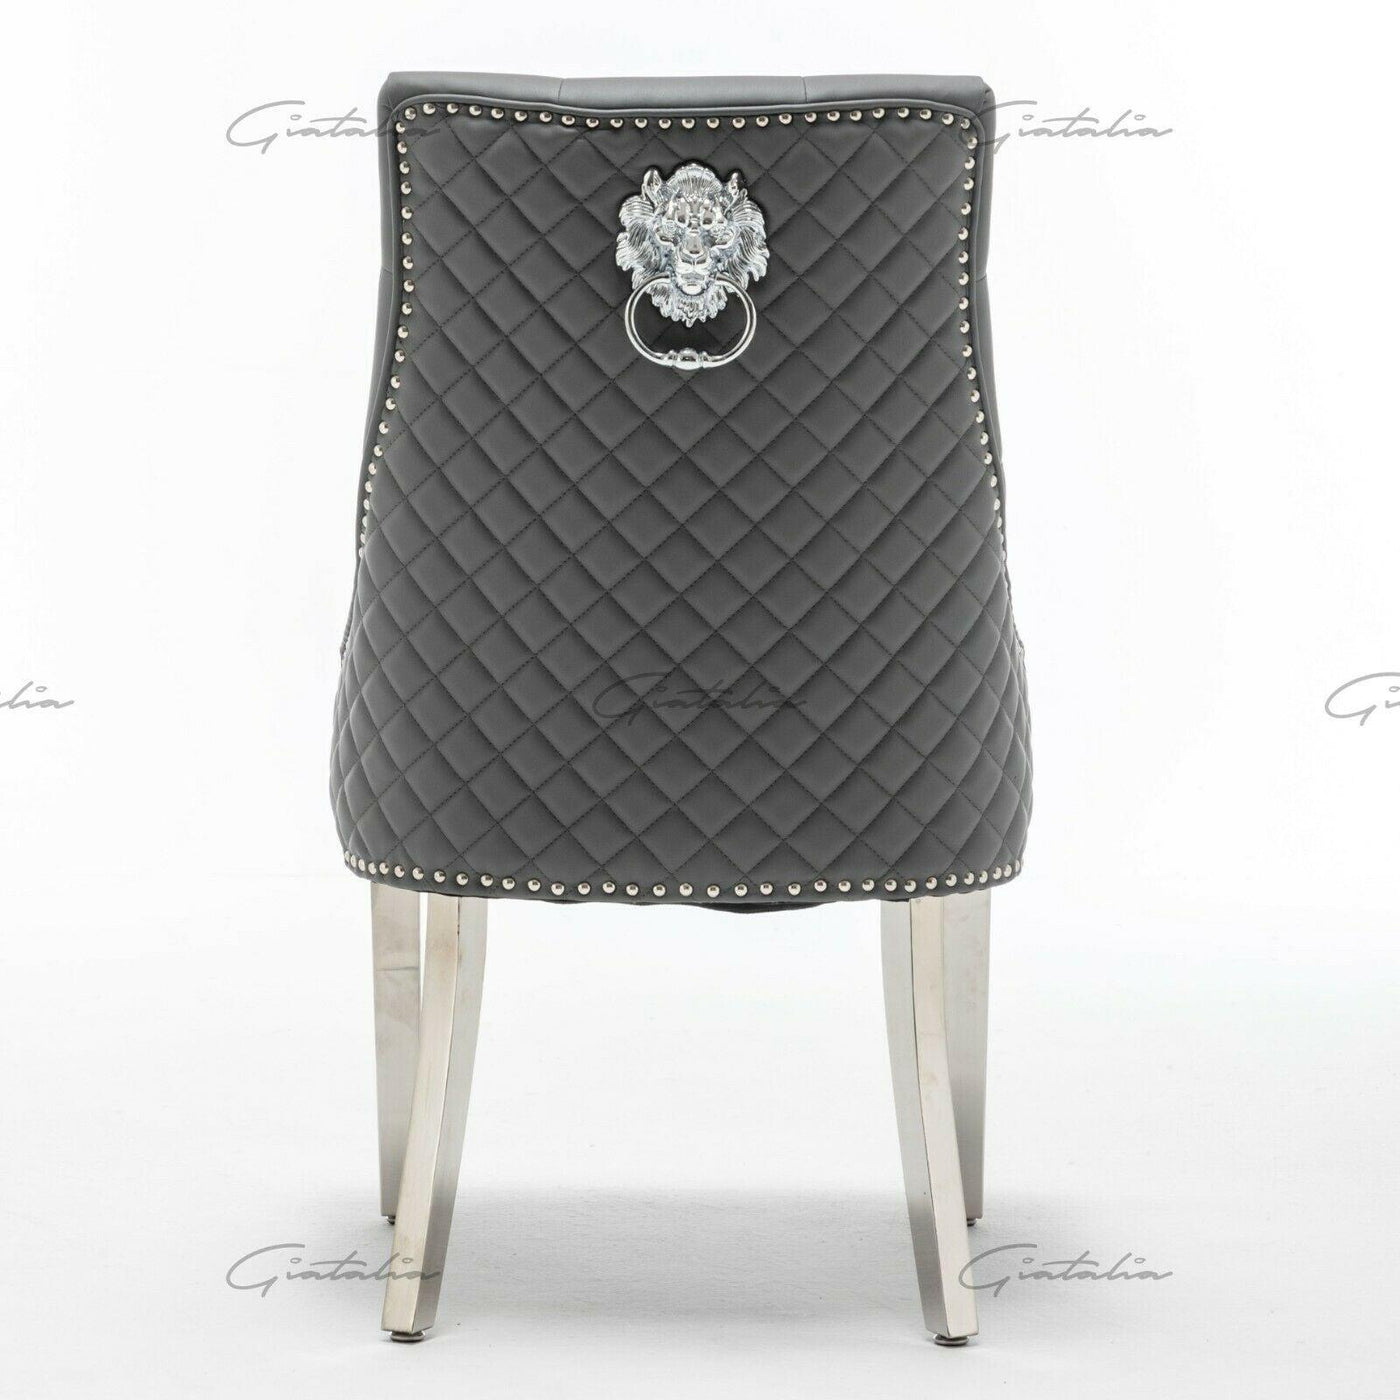 Louis 180cm Grey Marble Dining Table + Grey Lion Knocker Faux Leather Chairs-Esme Furnishings